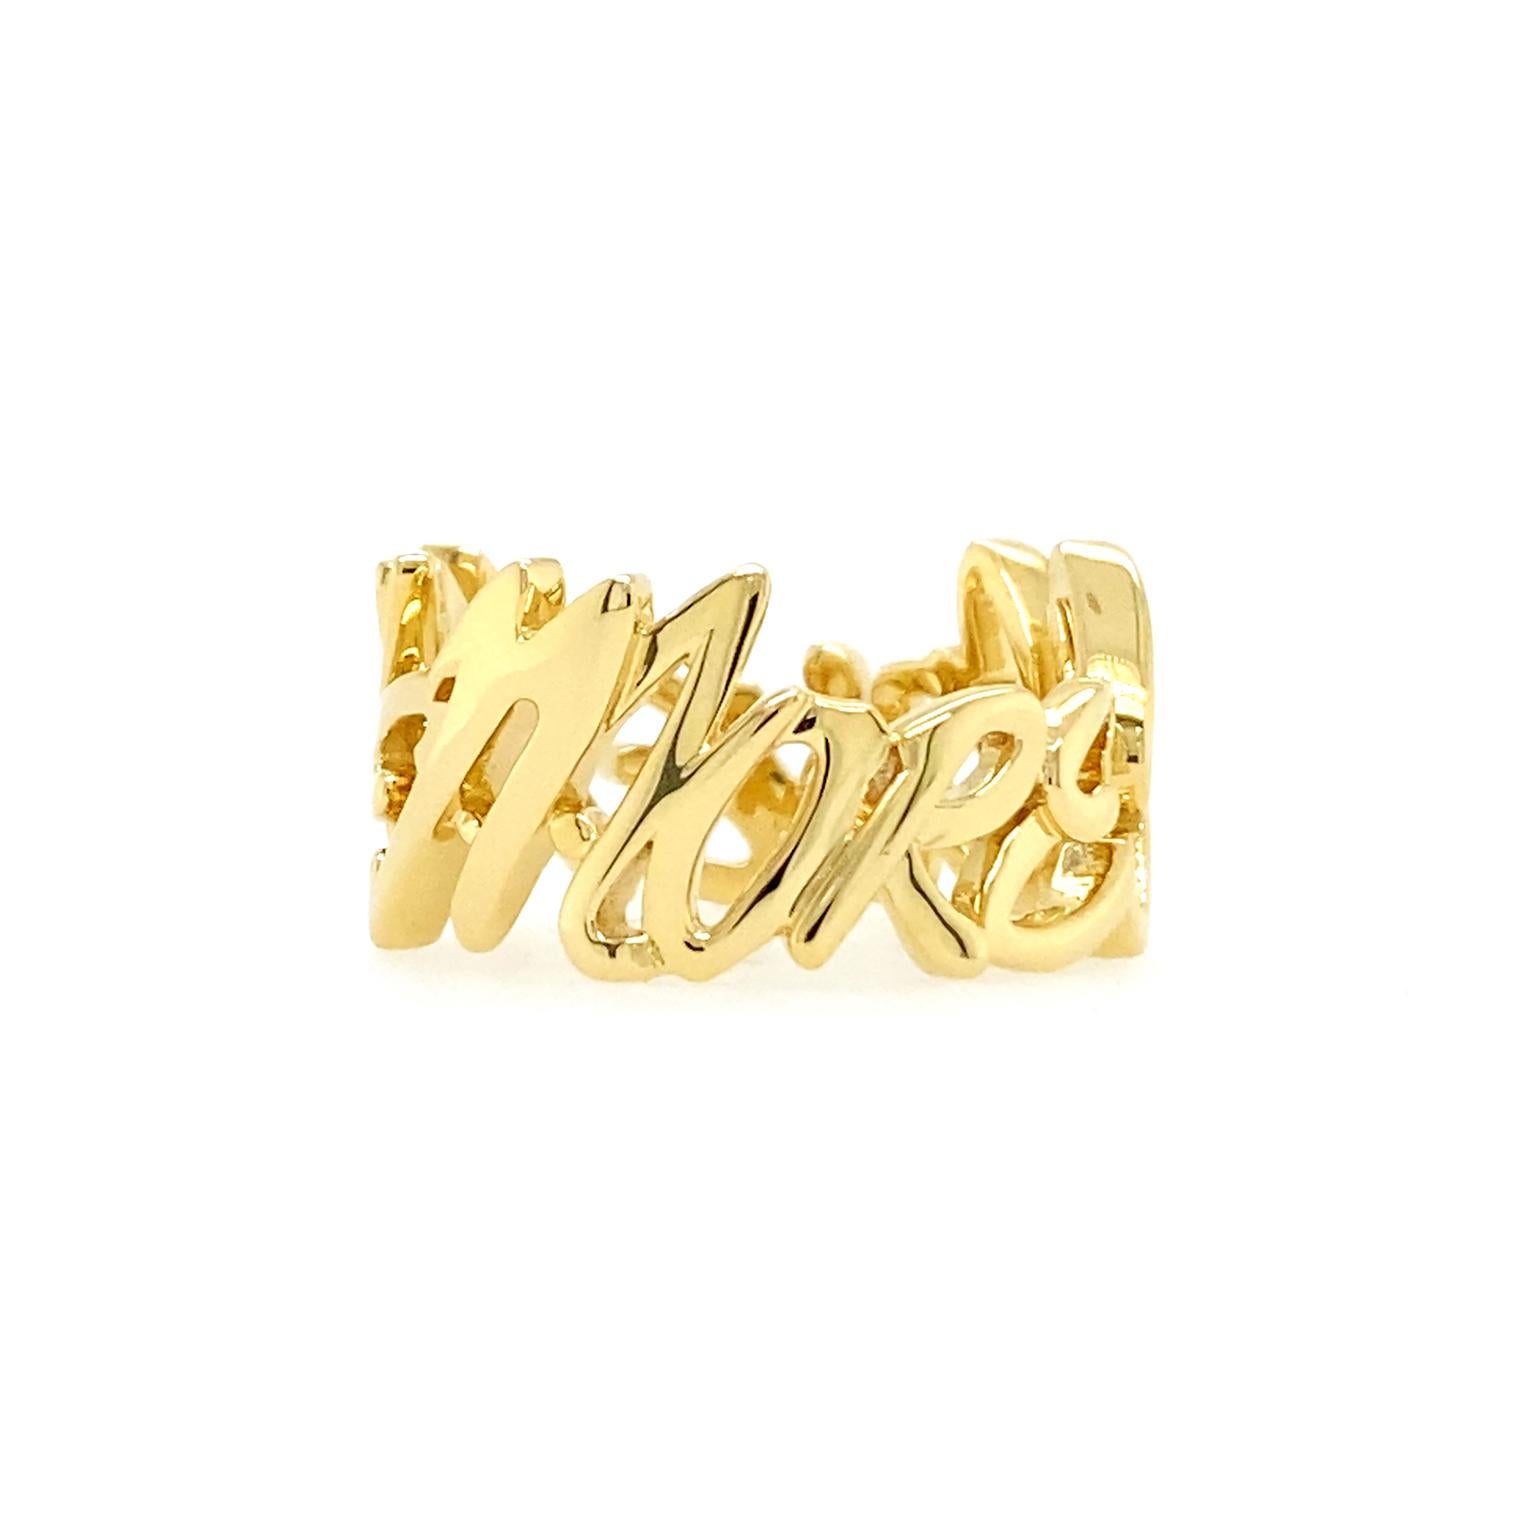 Precious metal transforms this message into a ring. The material of choice is 18k yellow gold, a blend of color, strength, and malleability. It’s formed into 9.75mm wide block letters saying 'I Love Me More.' The font’s cursive influence connects